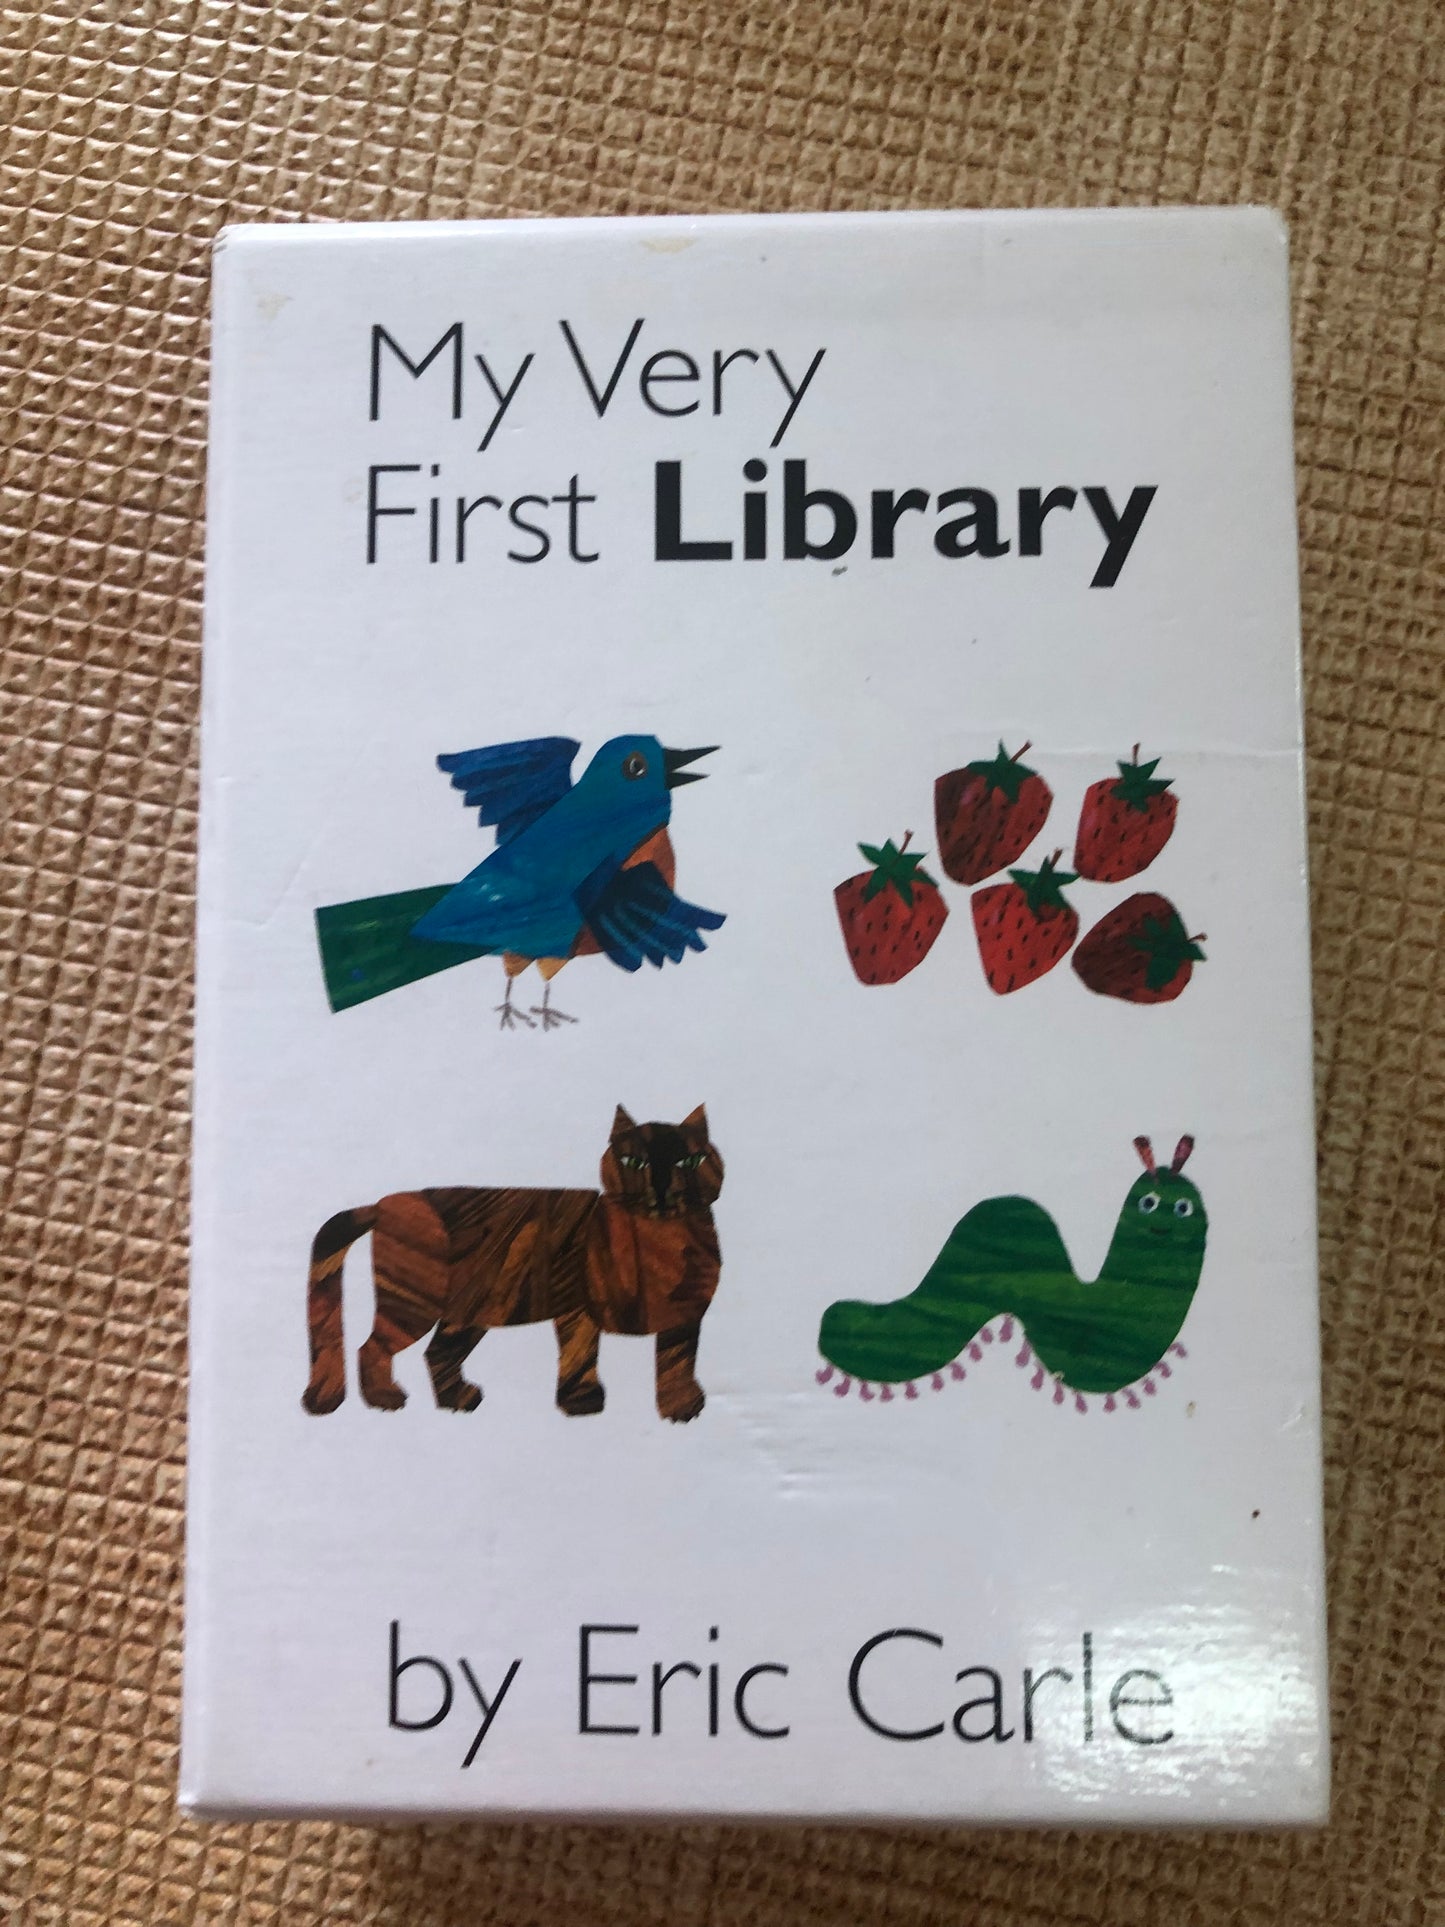 My Very First Library by Eric Carle